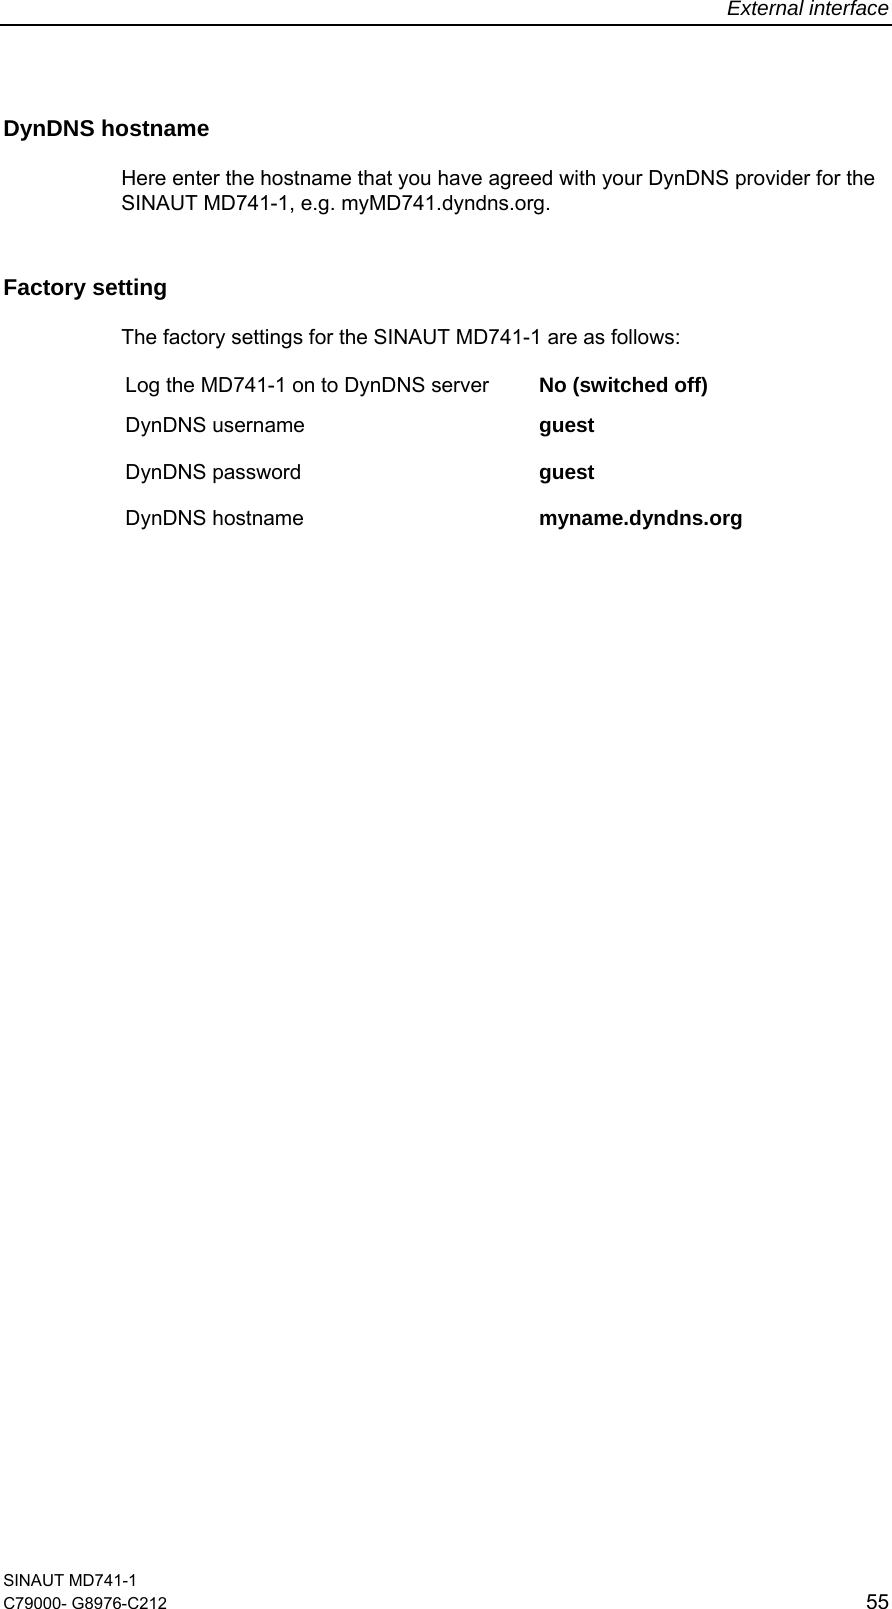 External interface SINAUT MD741-1 C79000- G8976-C212  55  DynDNS hostname  Here enter the hostname that you have agreed with your DynDNS provider for the SINAUT MD741-1, e.g. myMD741.dyndns.org. Factory setting  The factory settings for the SINAUT MD741-1 are as follows: Log the MD741-1 on to DynDNS server  No (switched off) DynDNS username  guest DynDNS password  guest  DynDNS hostname  myname.dyndns.org  